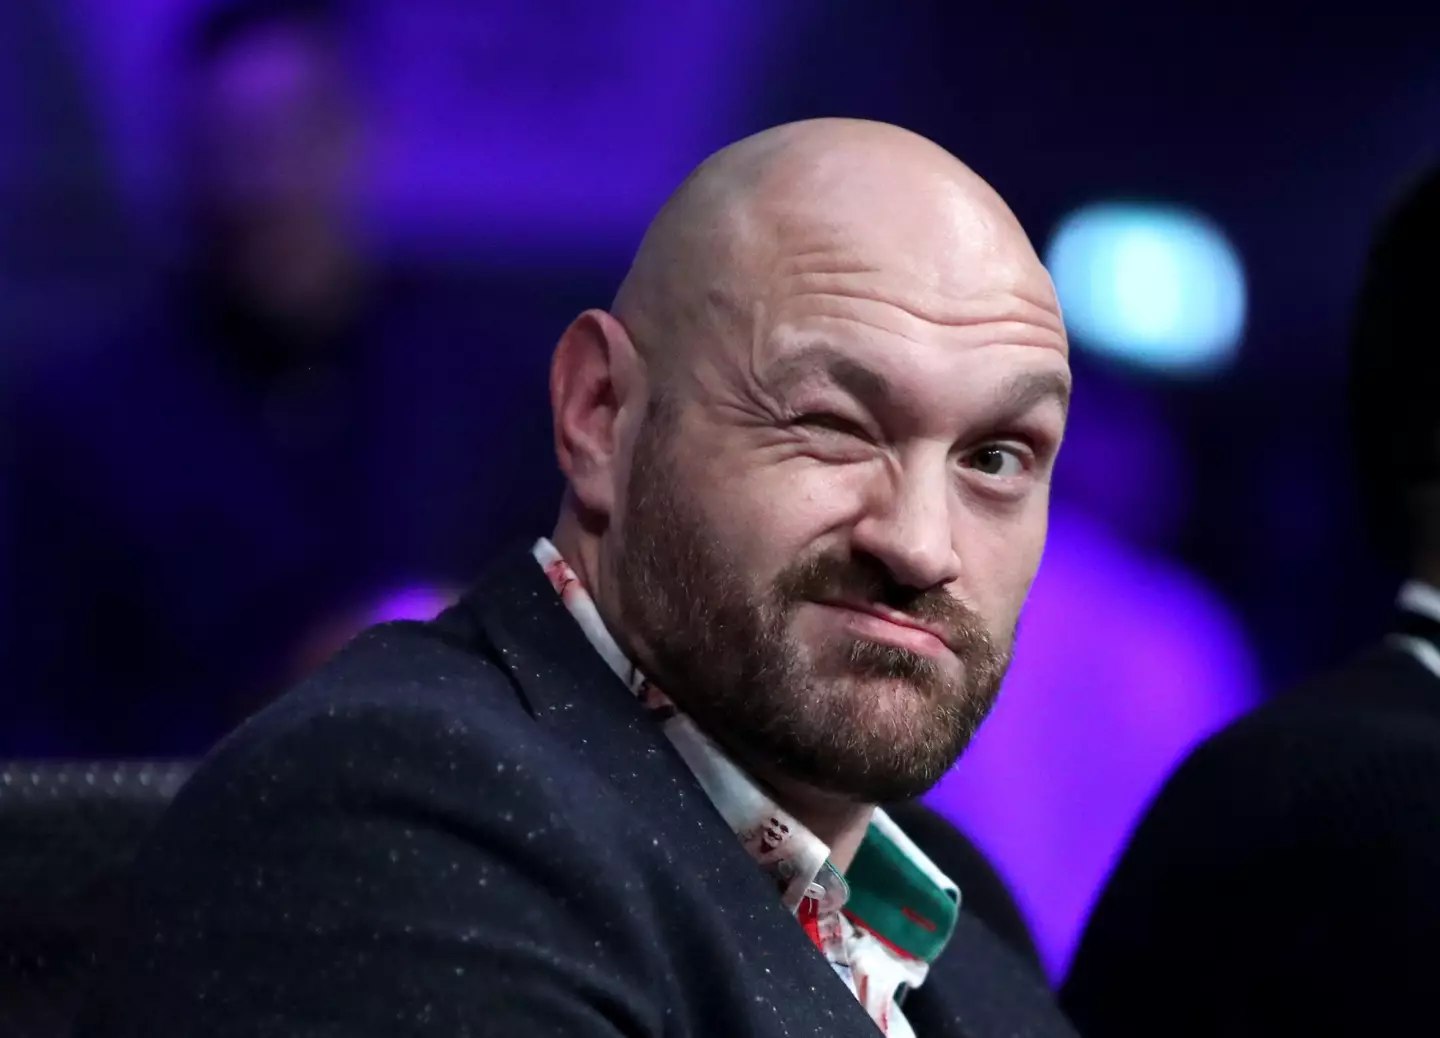 Tyson Fury encouraged the audience to chant, 'AJ is a p***k' during his homecoming tour.